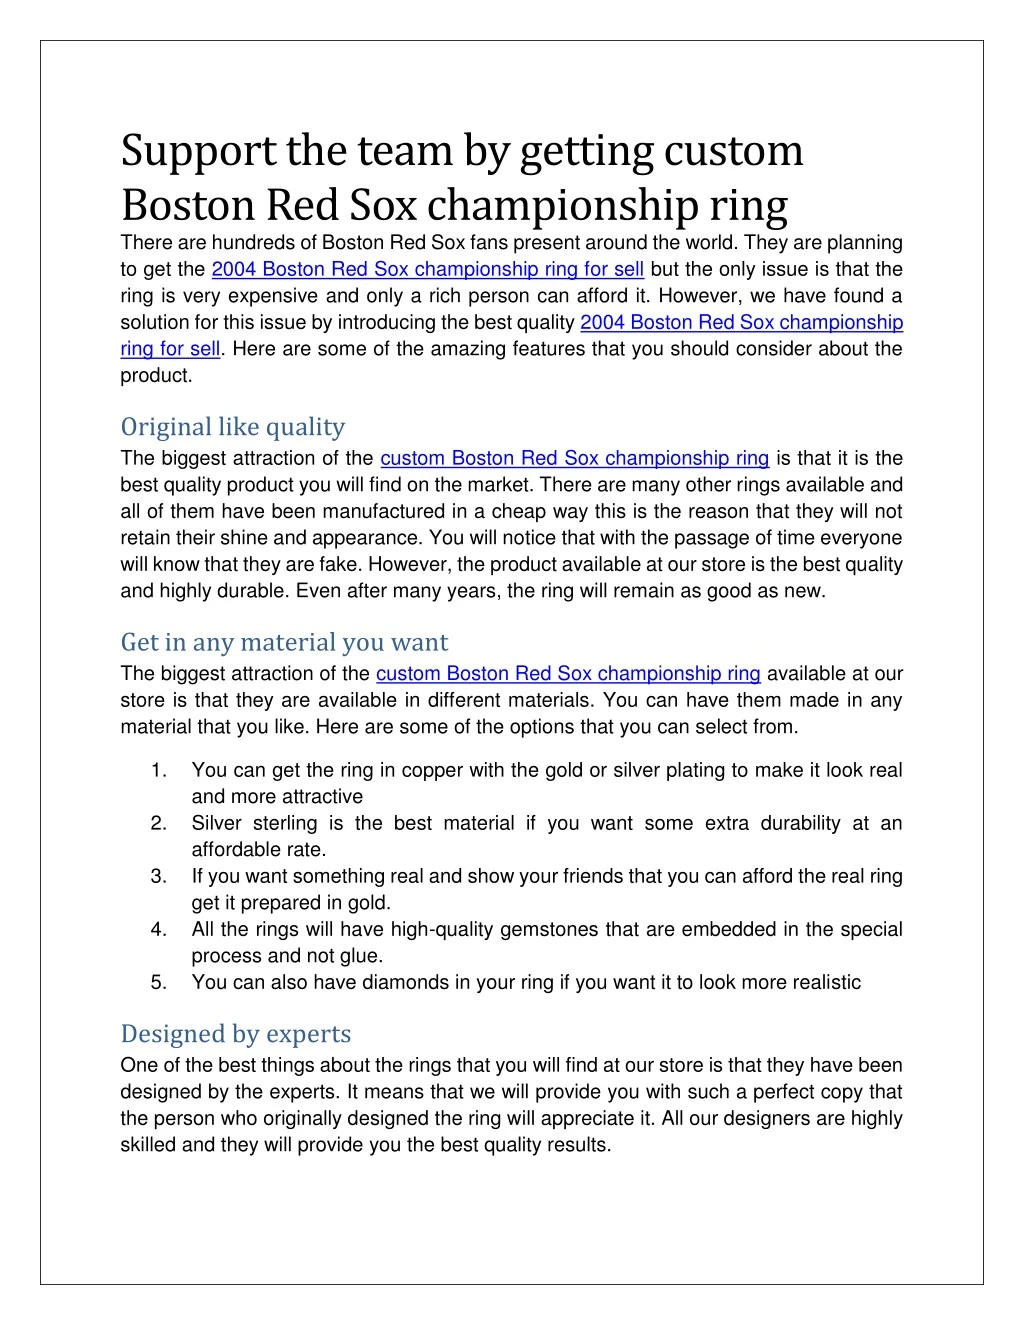 support the team by getting custom boston